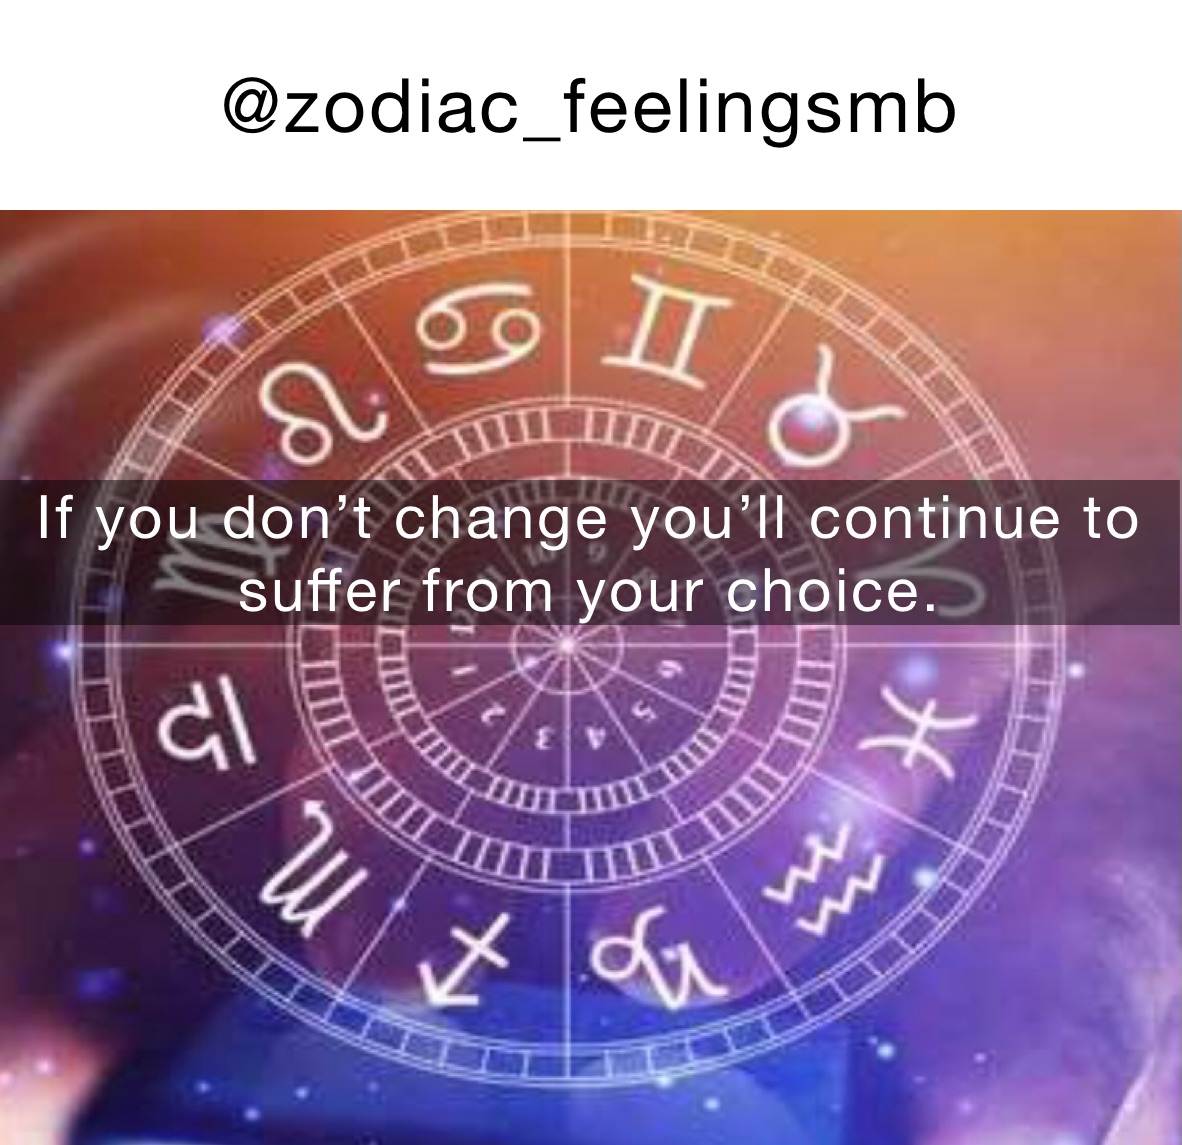 @zodiac_feelingsmb If you don’t change you’ll continue to suffer from your choice.